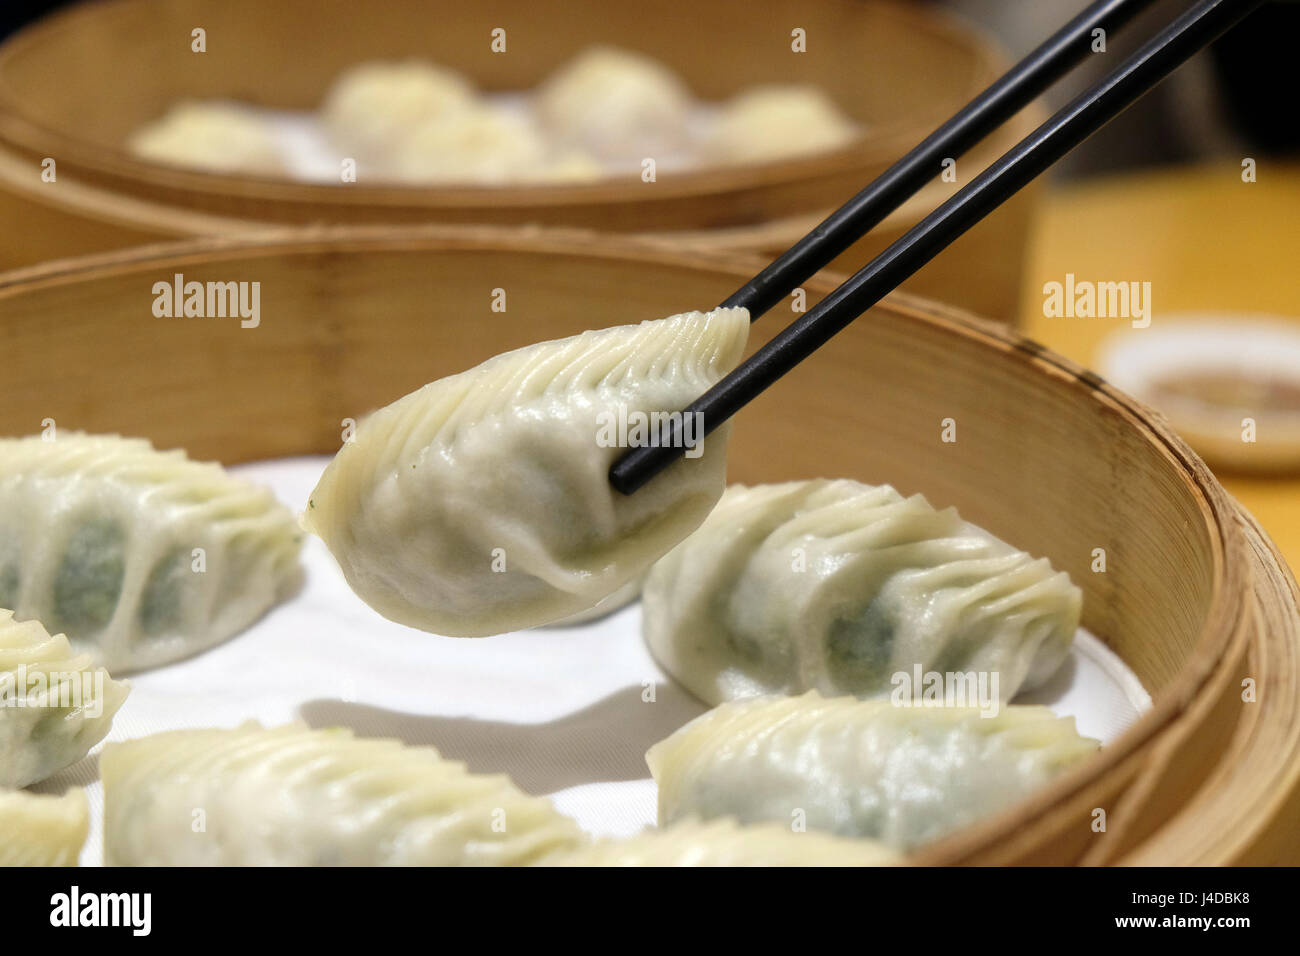 Chinese steamed dumpling in Bamboo Steamer, commonly eaten in East Asia in Beijing, China, February 23, 2016. Stock Photo